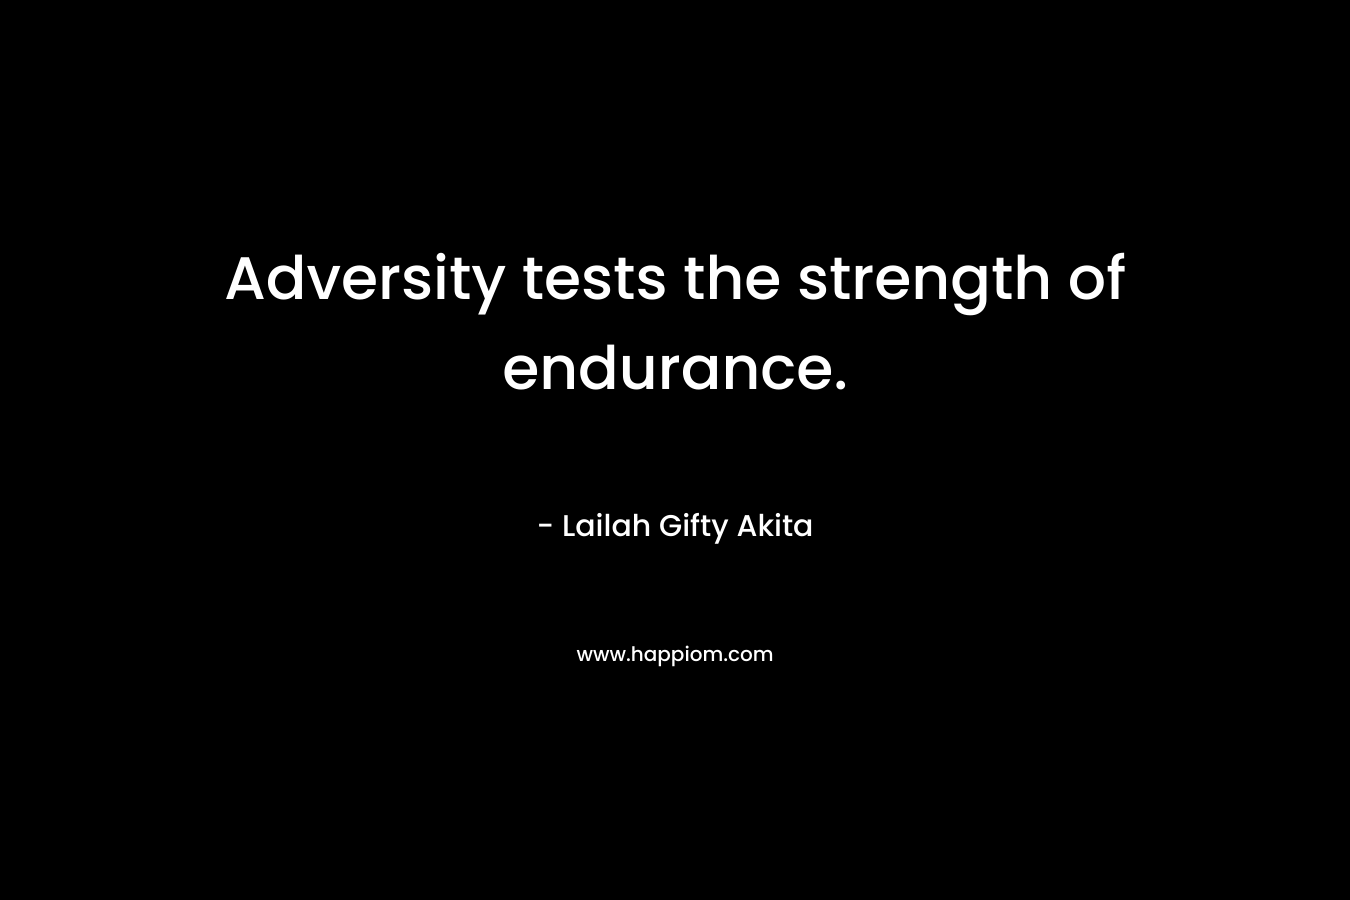 Adversity tests the strength of endurance.